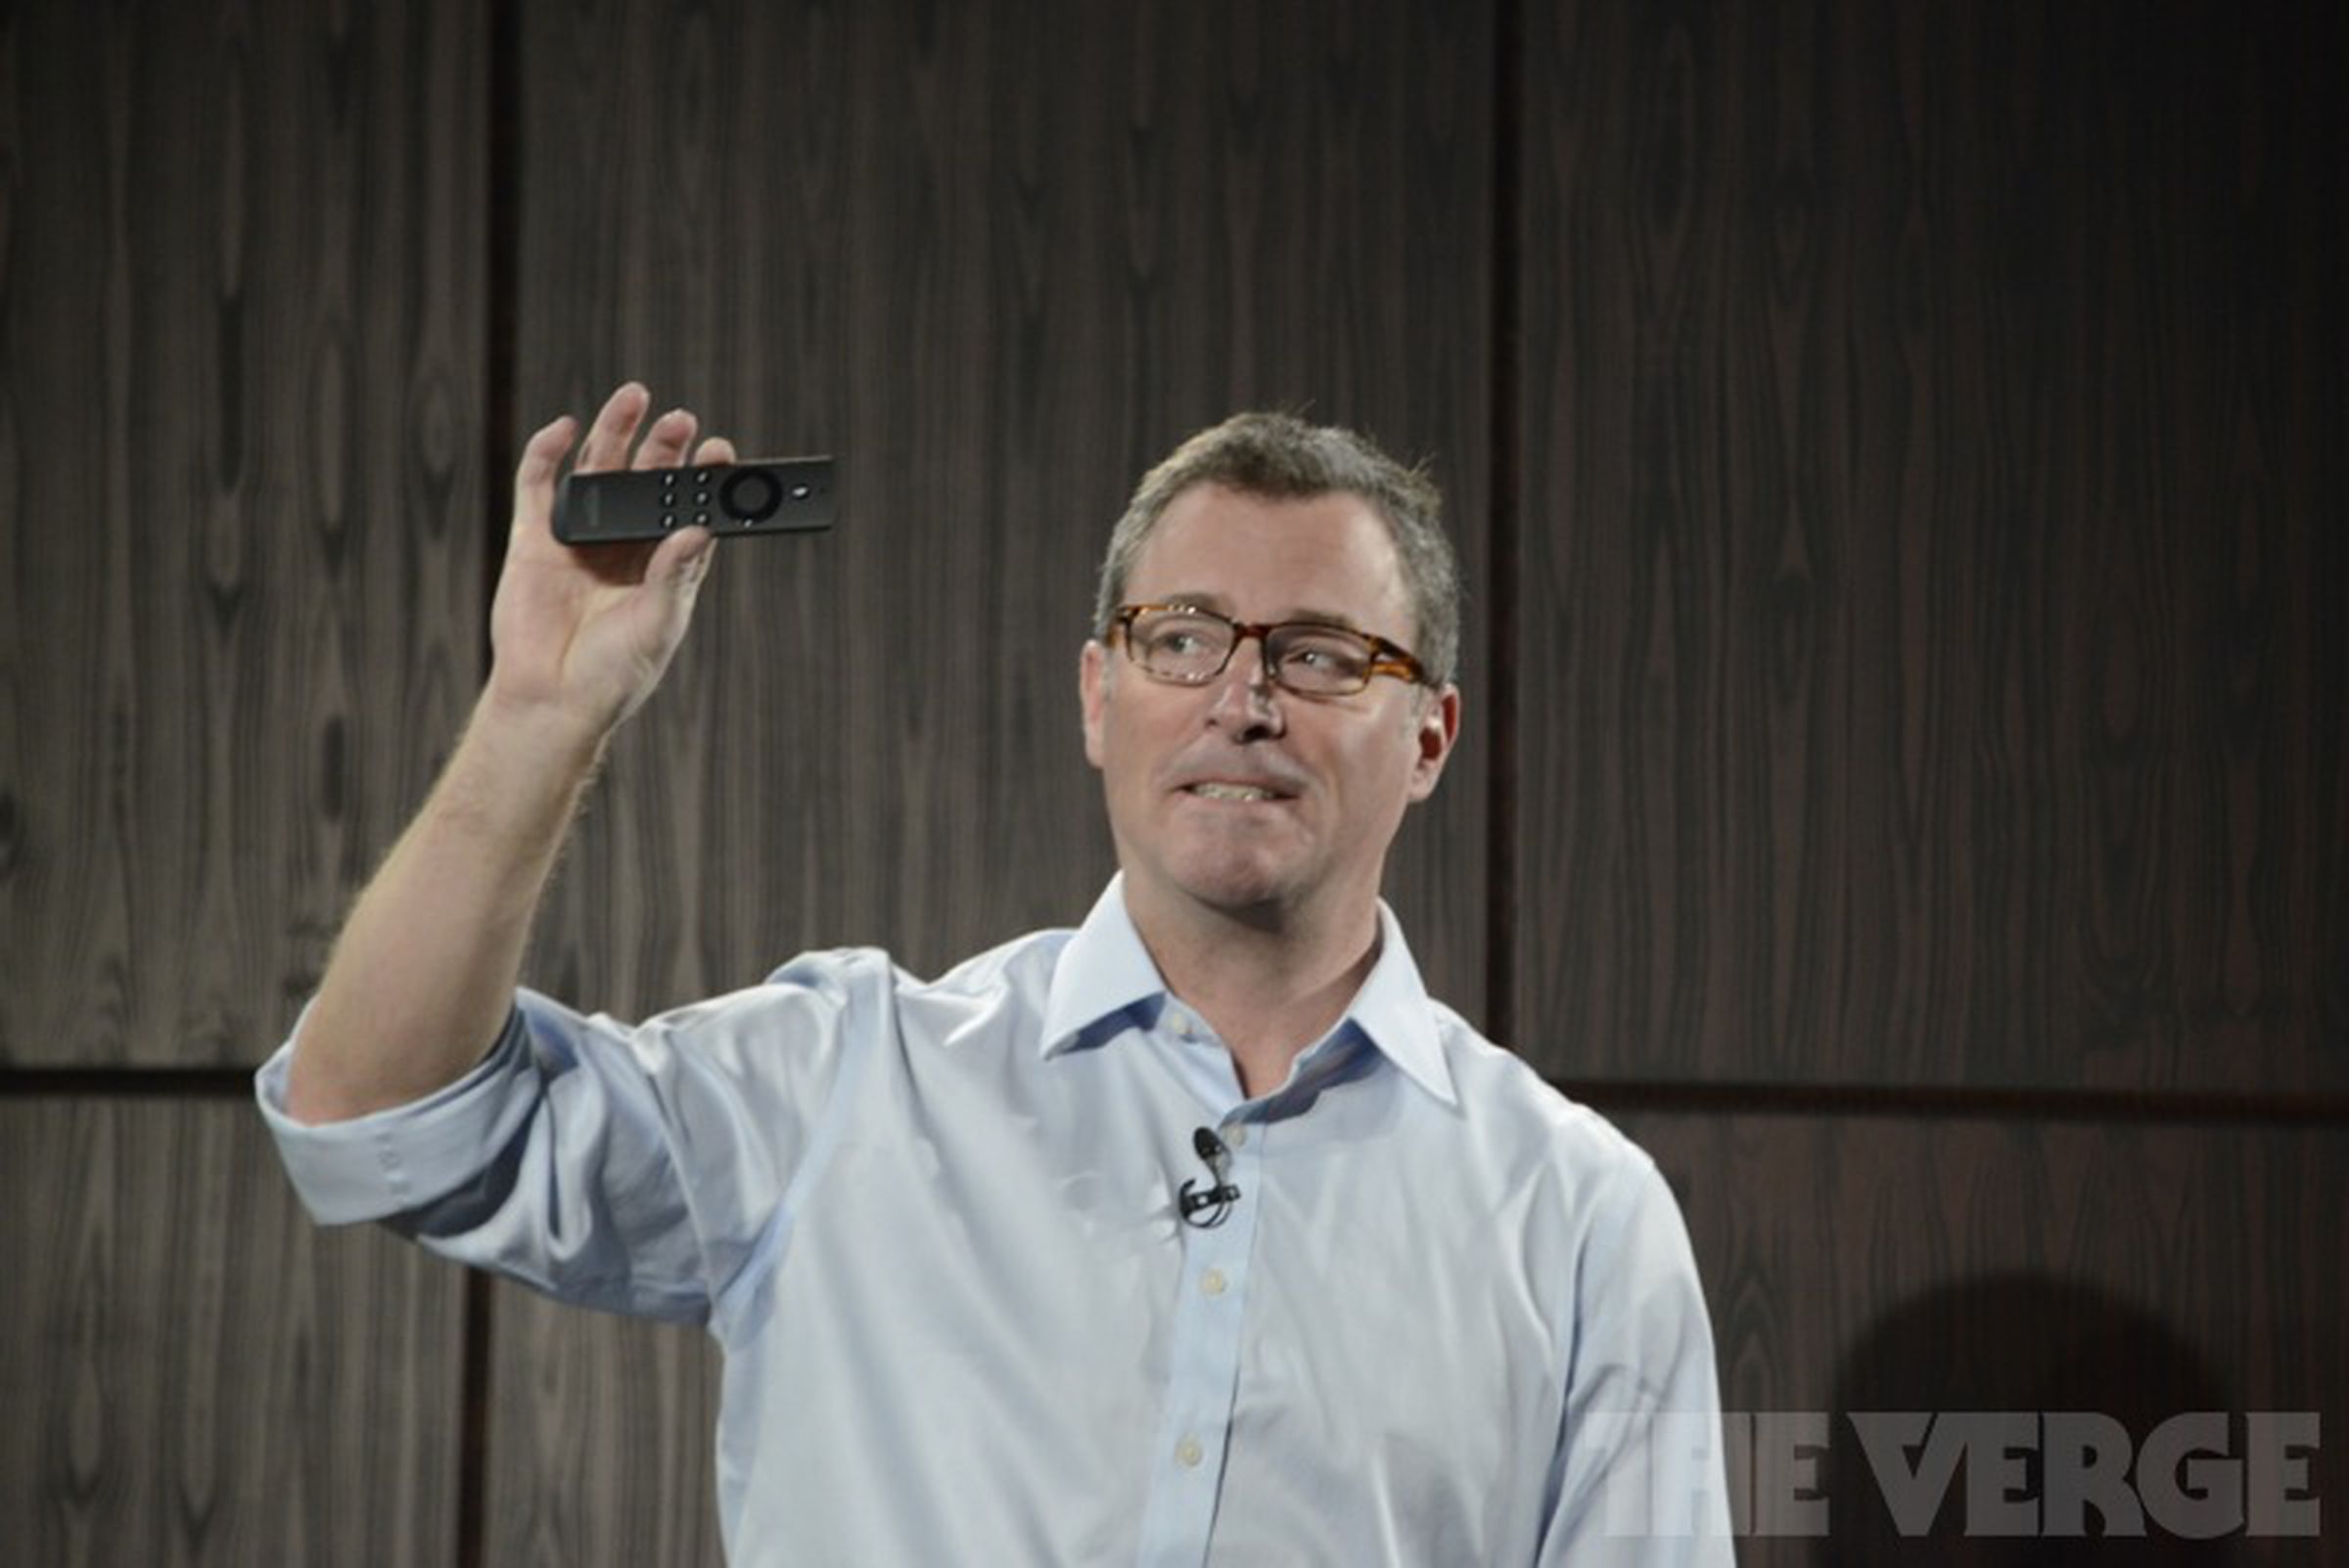 Photos of Amazon's FireTV from their 'video business' event